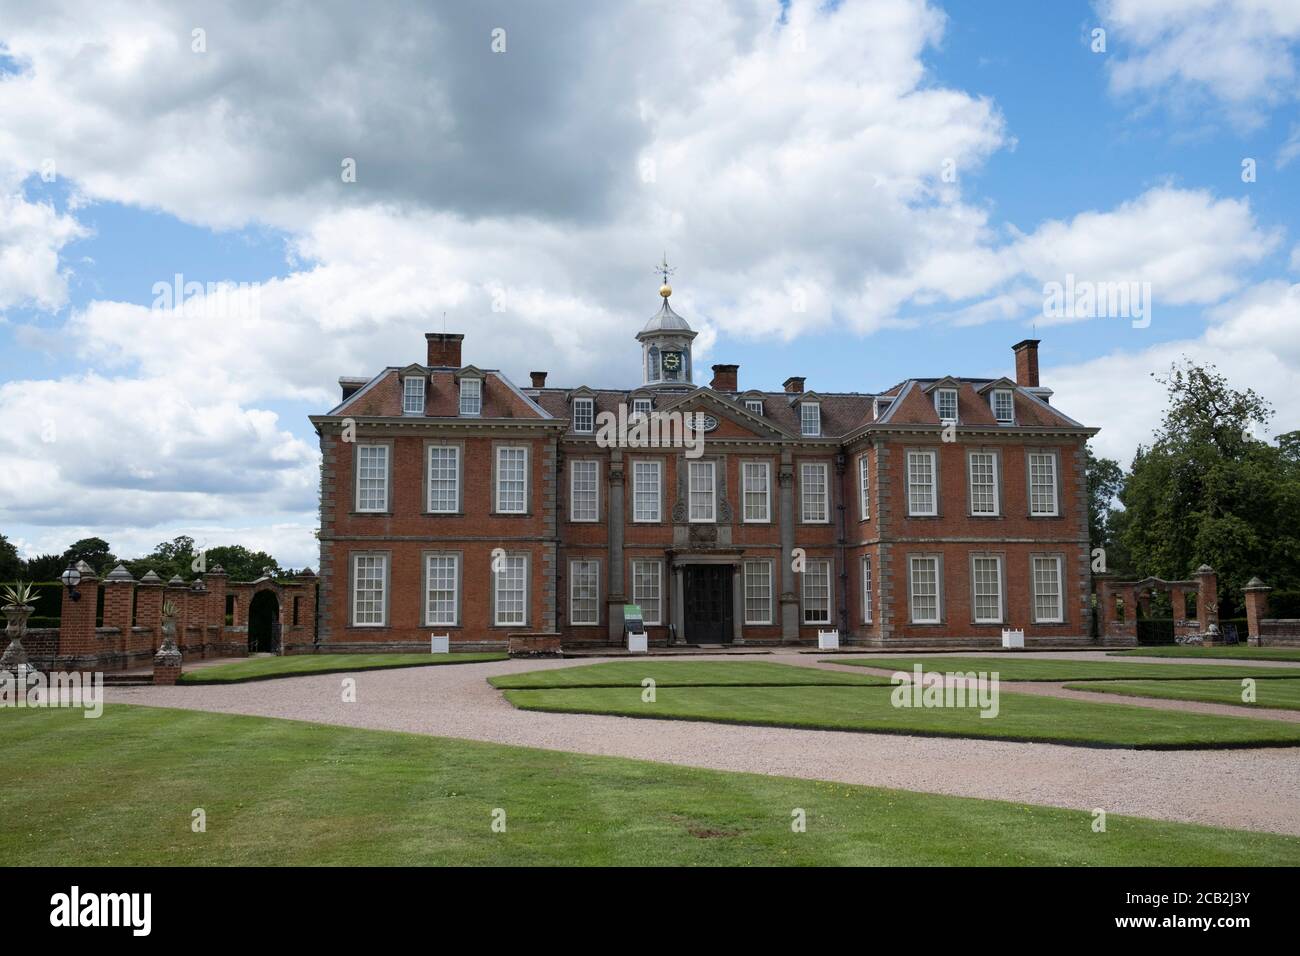 Hanbury Hall on 10th July 2020 in Hanbury, United Kingdom. Hanbury Hall is a large 18th-century stately home standing in parkland at Hanbury, Worcestershire. The main range has two storeys and is built of red brick in the Queen Anne style. It is a Grade I listed building, and the associated Orangery and Long Gallery pavilion ranges are listed Grade II. It is managed by the National Trust and is open to the public. Stock Photo